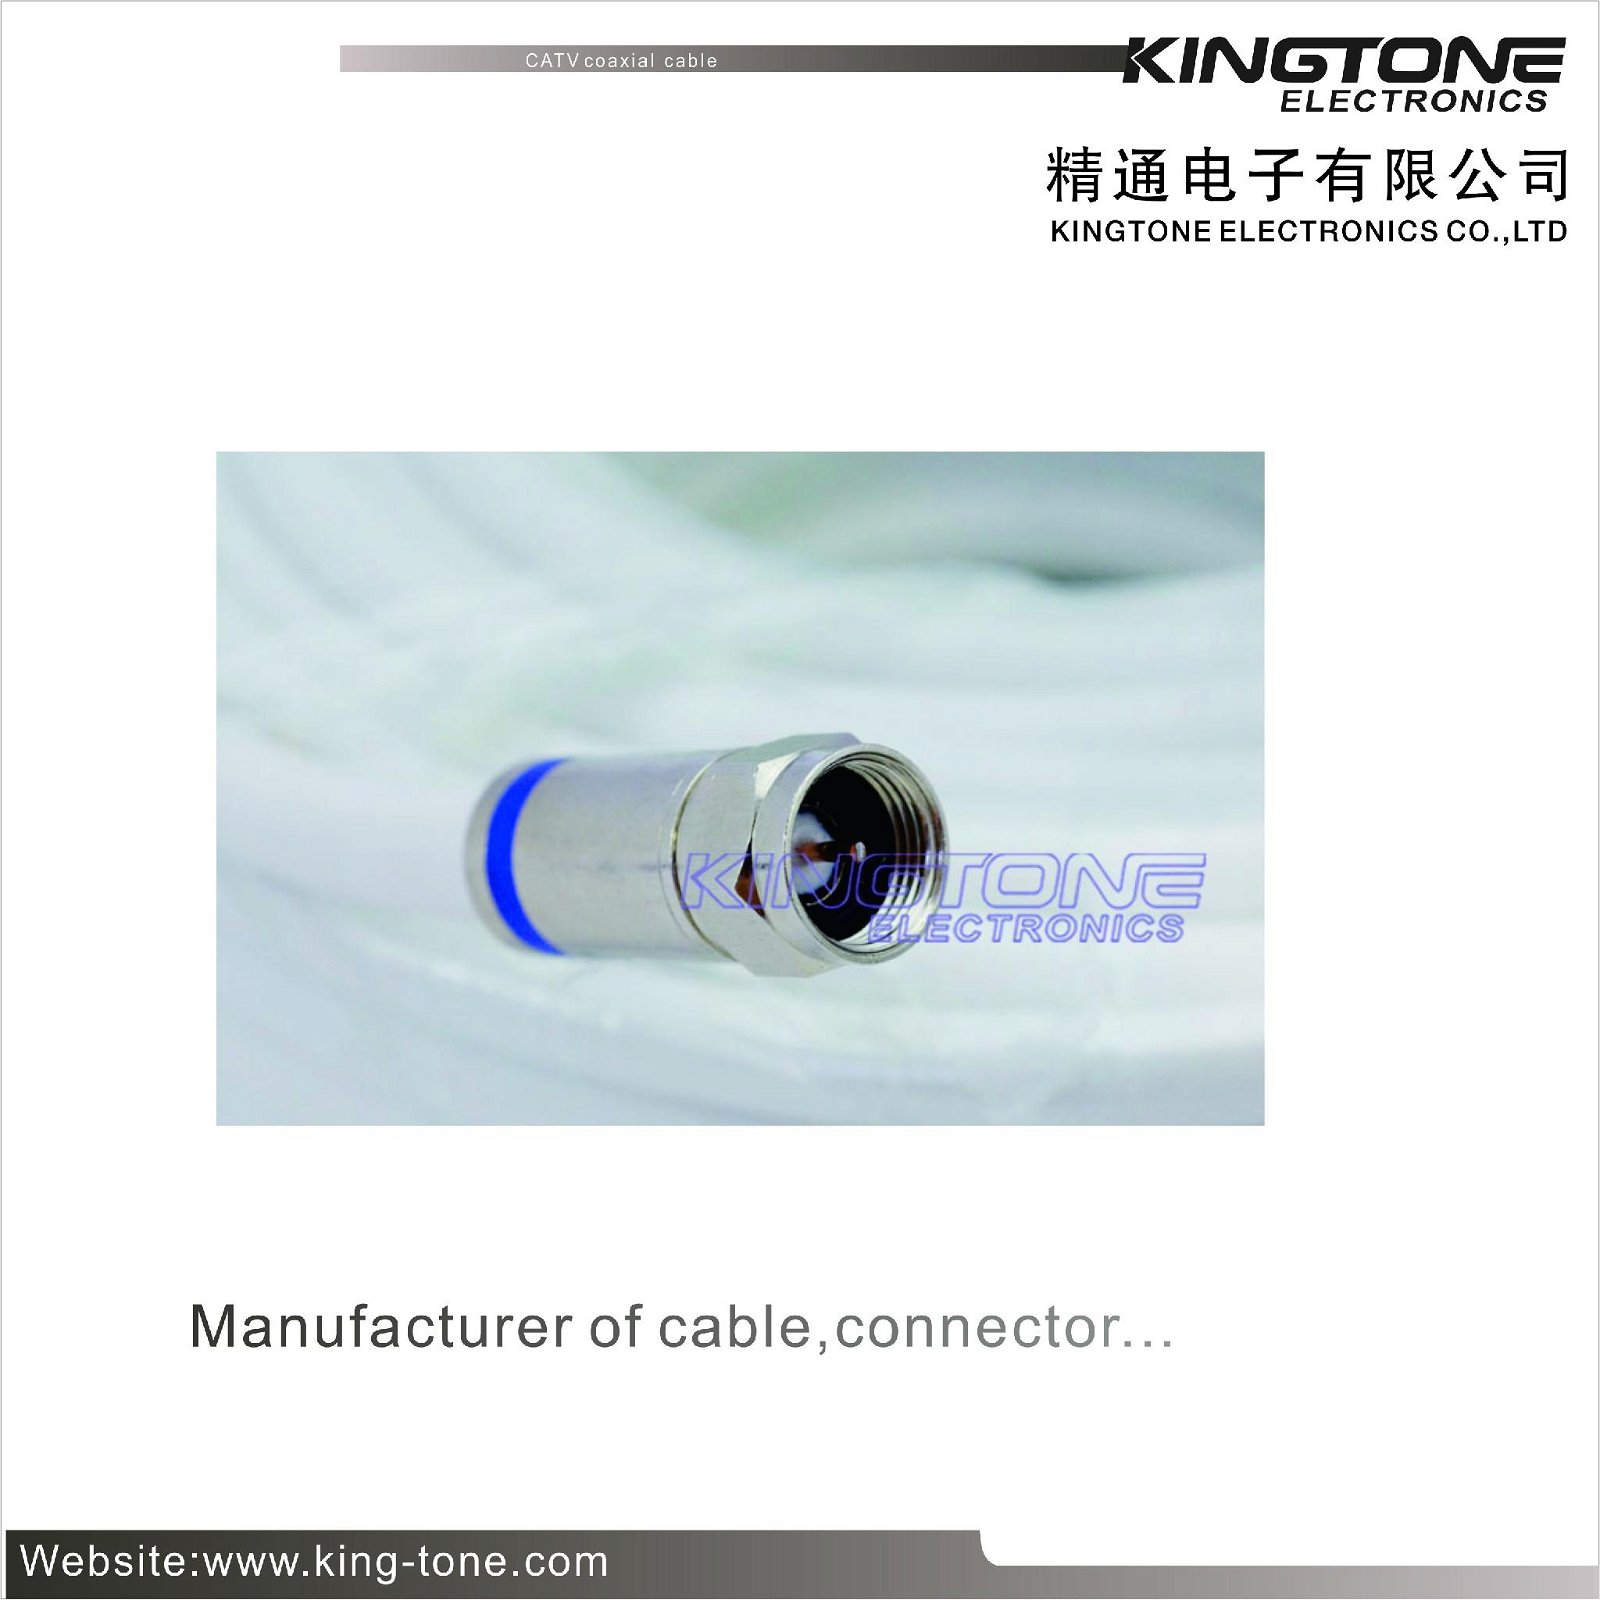  CATV Coaxial Cable RG6 in 20M with Compression Connector